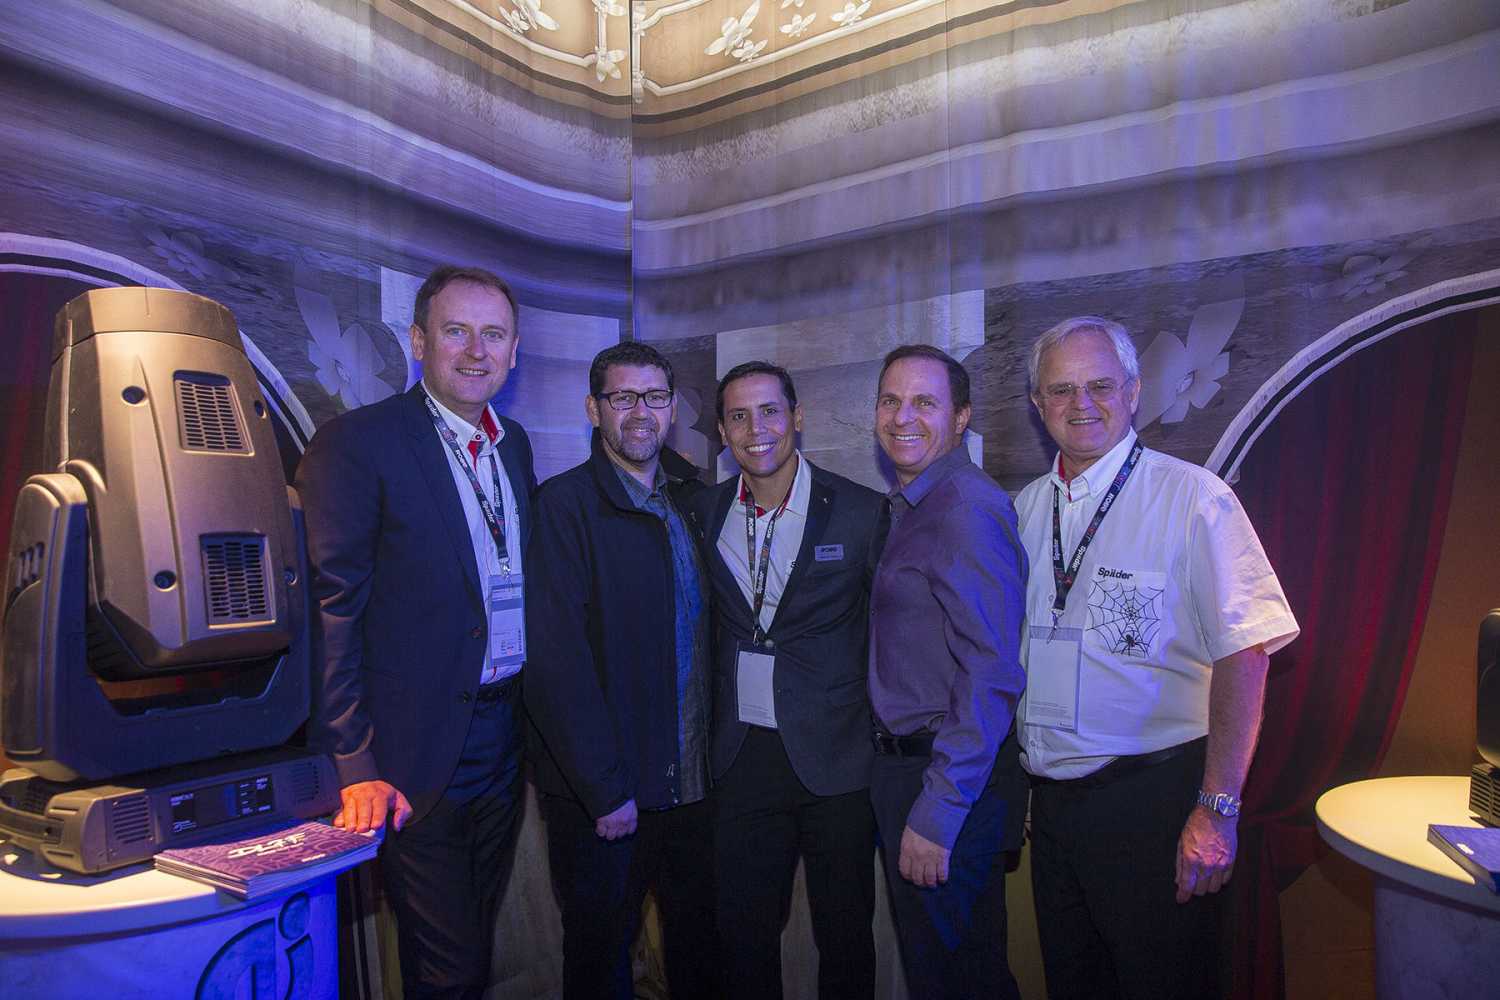 Josef Valchar (CEO Robe); Enrique Patiño (commercial director at Showco), Guillermo Traverso (Robe regional sales manager for Latin America), Enrique Lask (CEO of GTM Holdings) and Harry von den Stemmen (sales director for Robe)